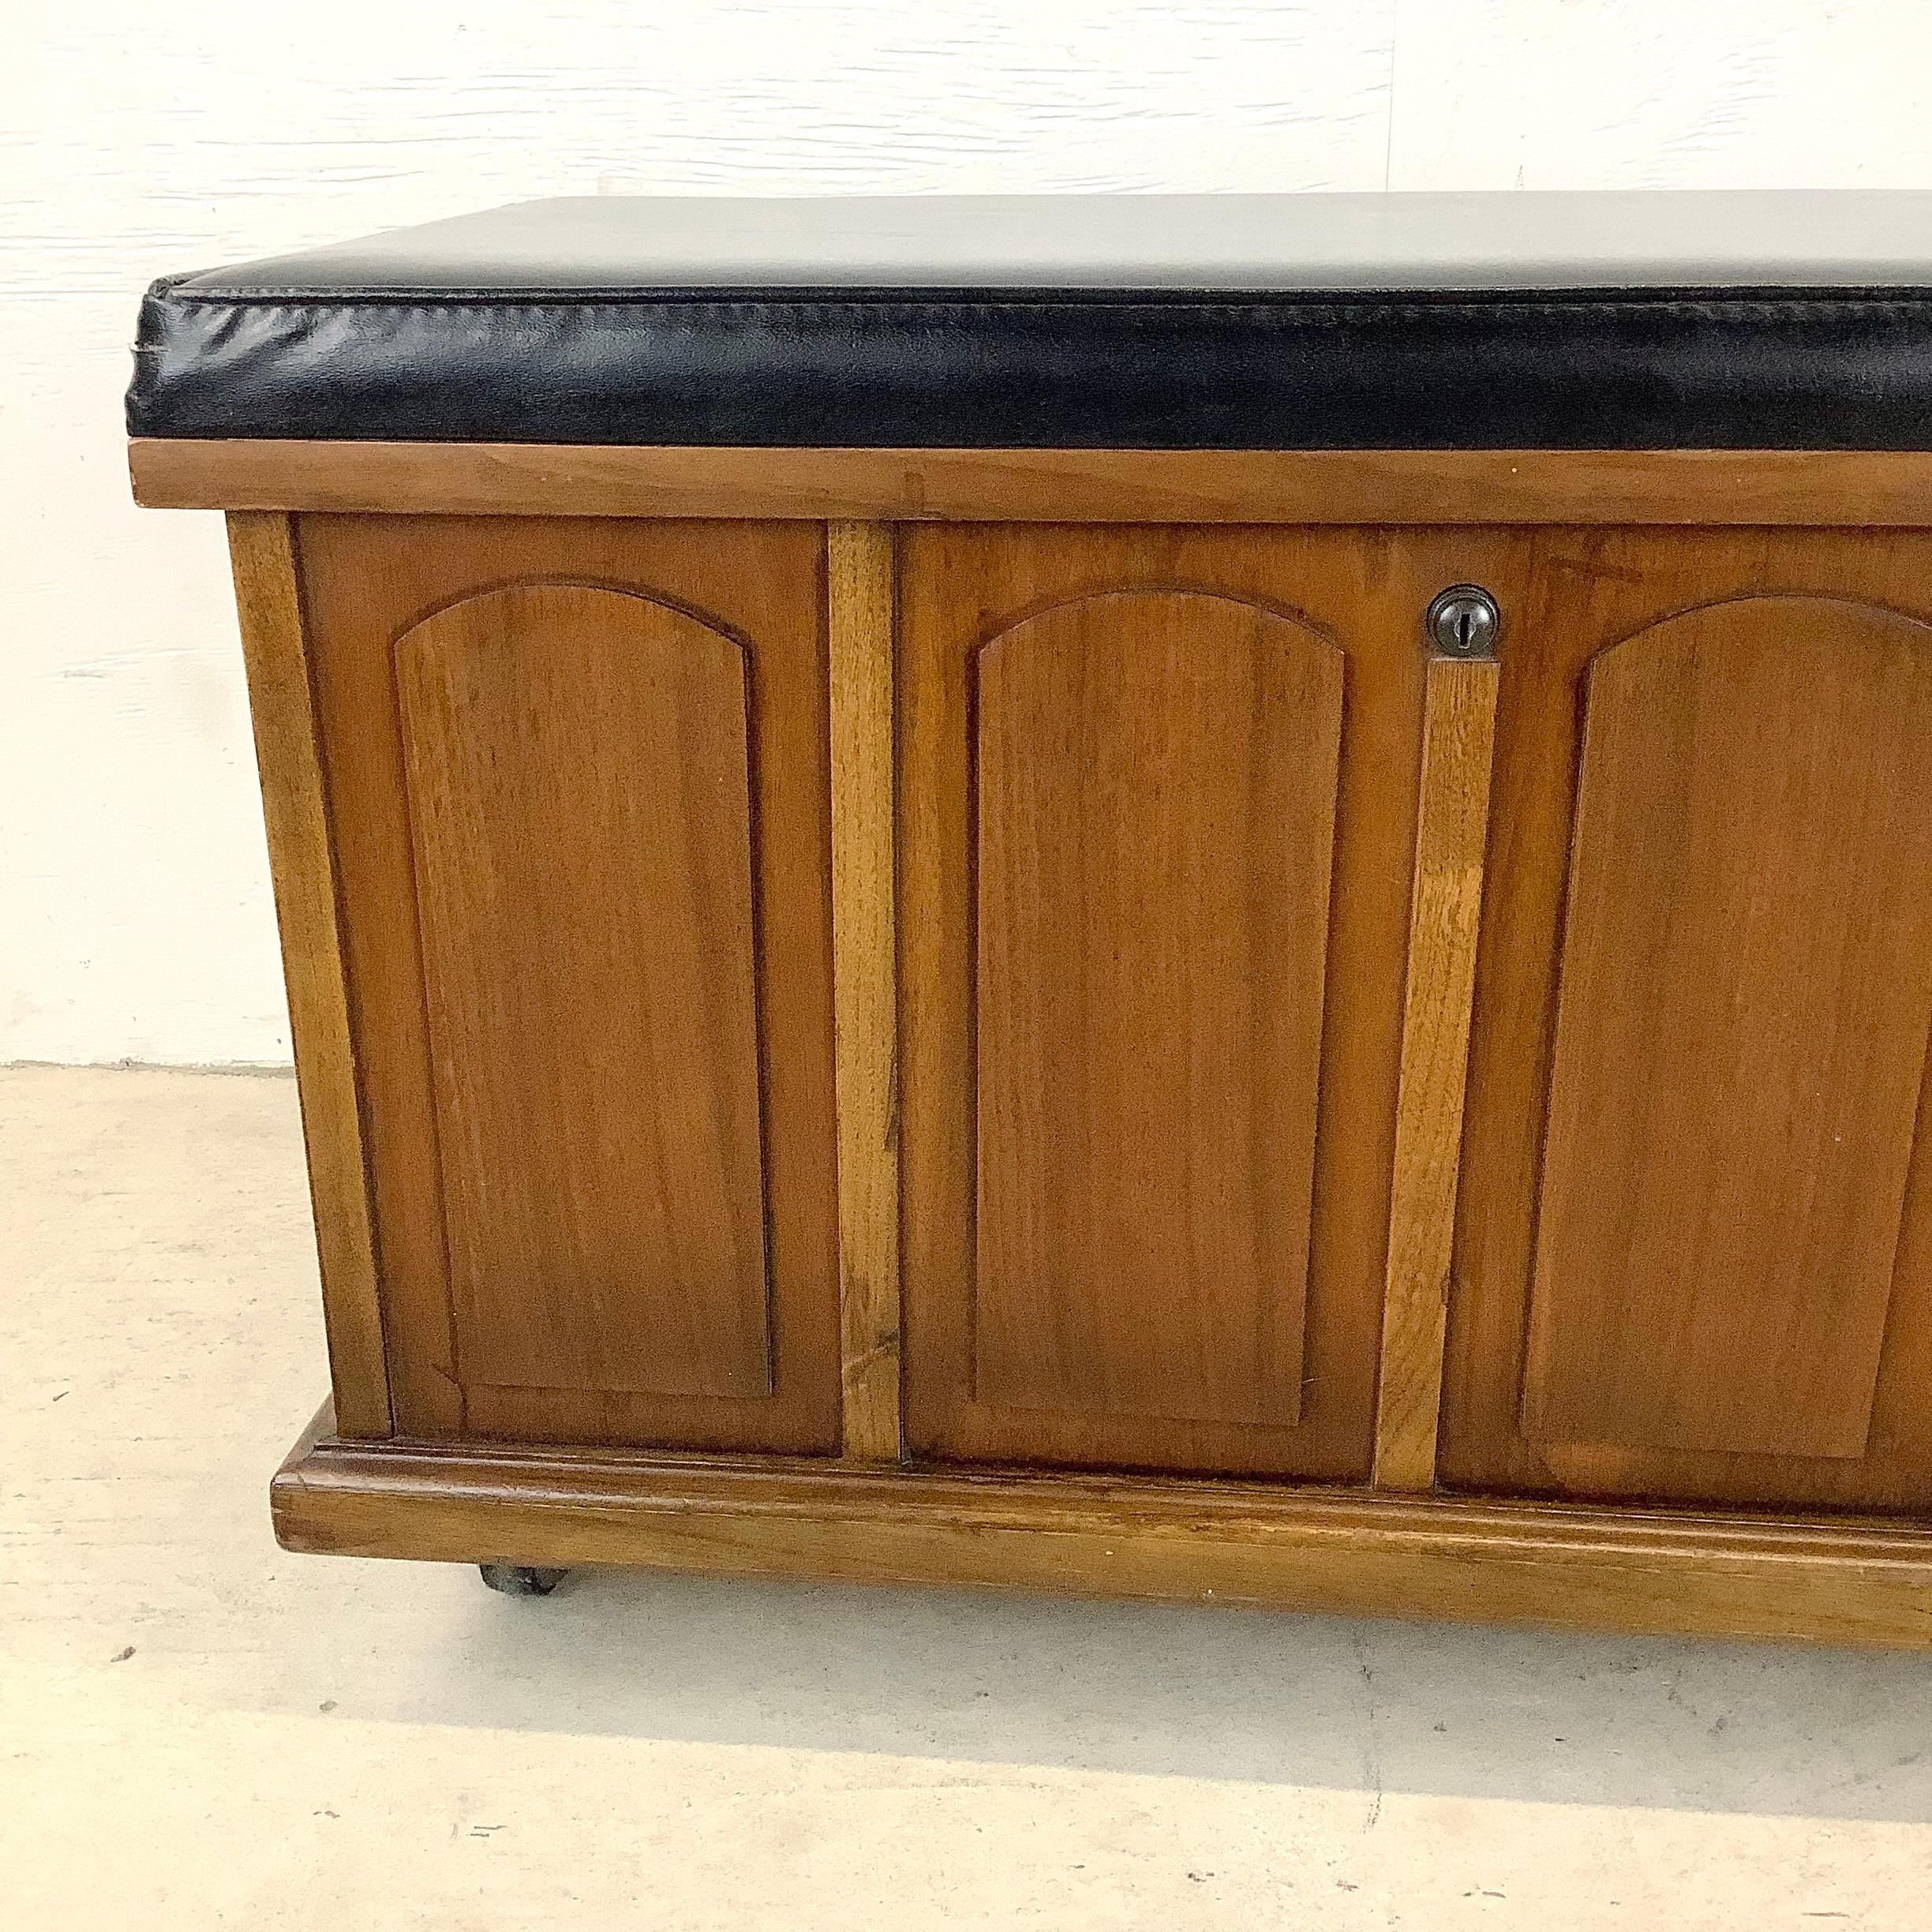 Plastic Mid-Century Modern Bench with Record Storage from Lane Furniture